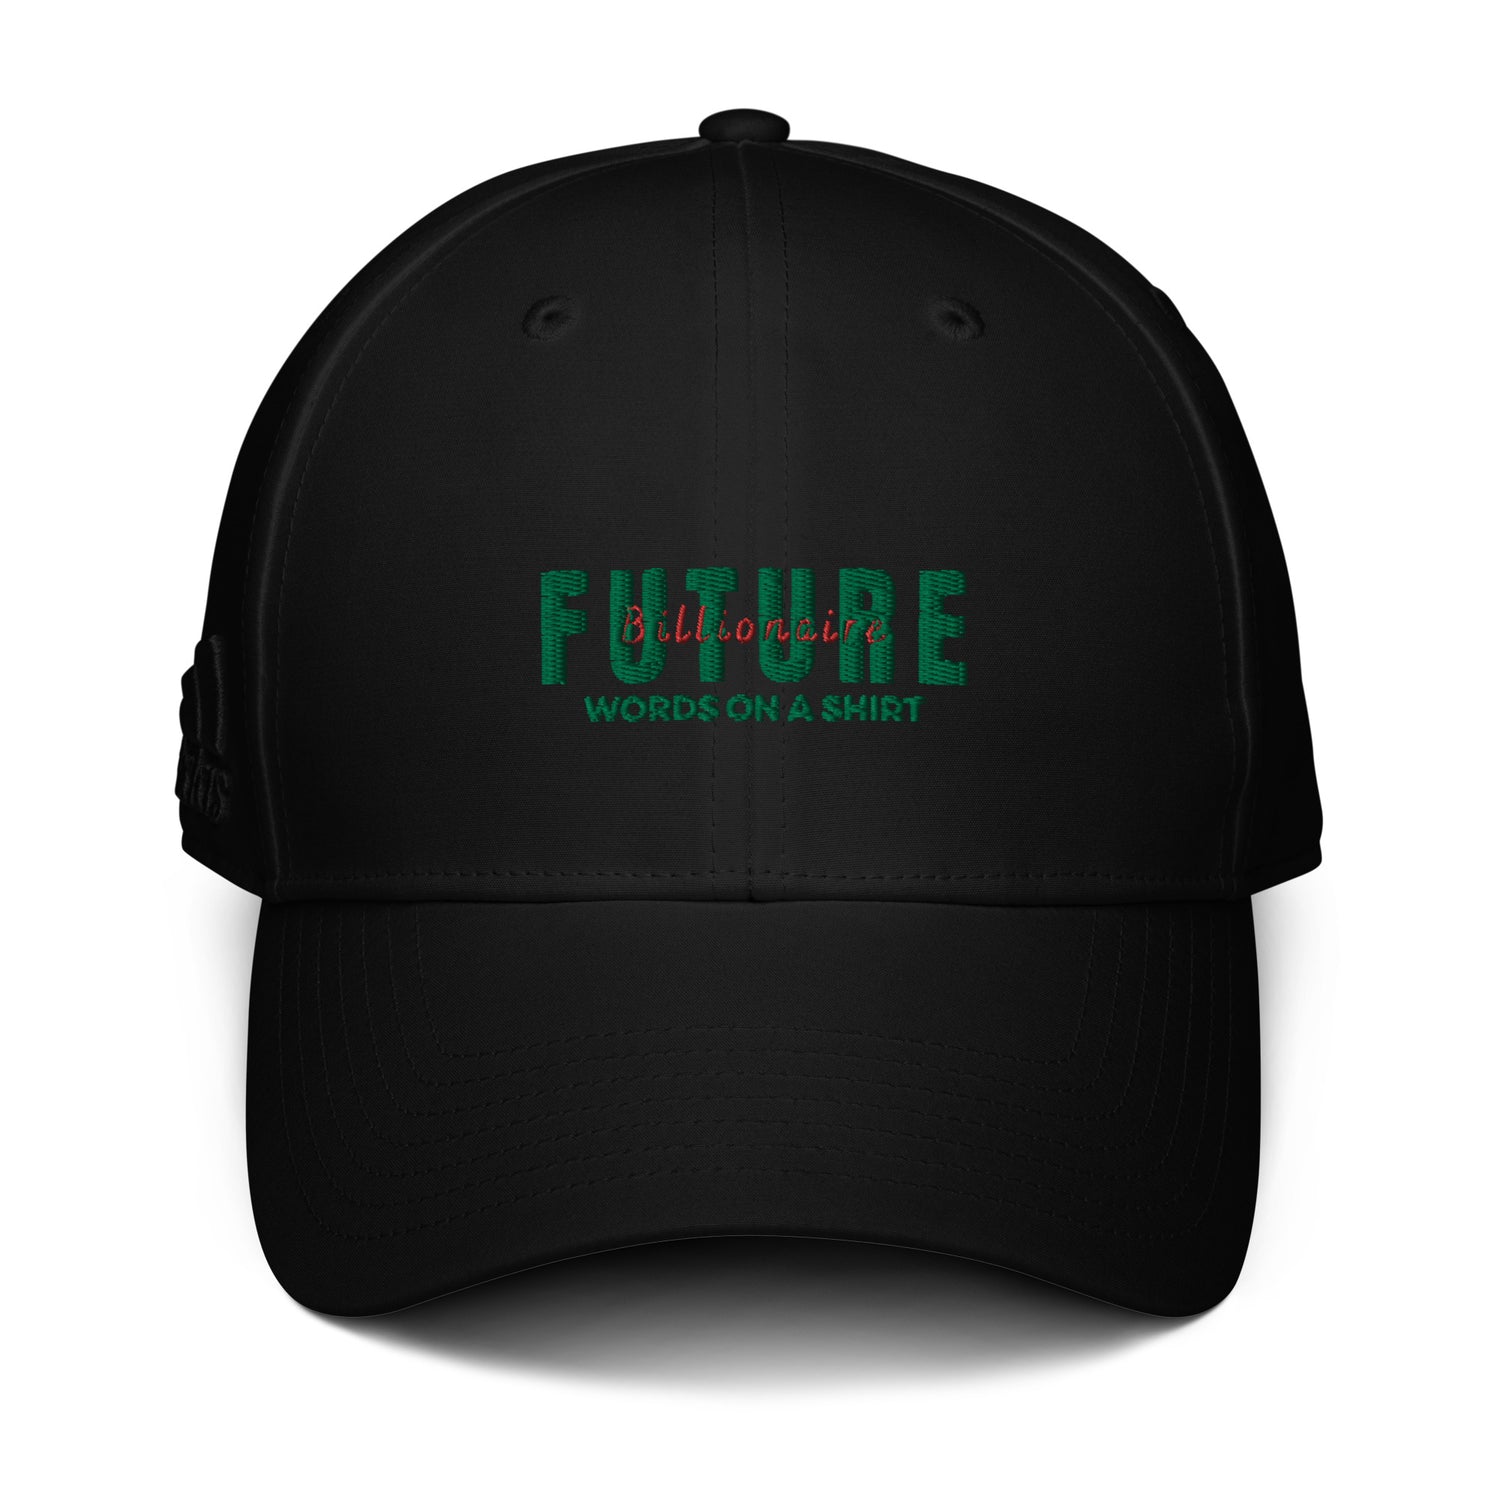 "Unleash your inner Future Billionaire with this playful adidas dad hat. The timeless style and adjustable snapback closure make it both comfortable and stylish. Perfect for those who don't take themselves too seriously!"